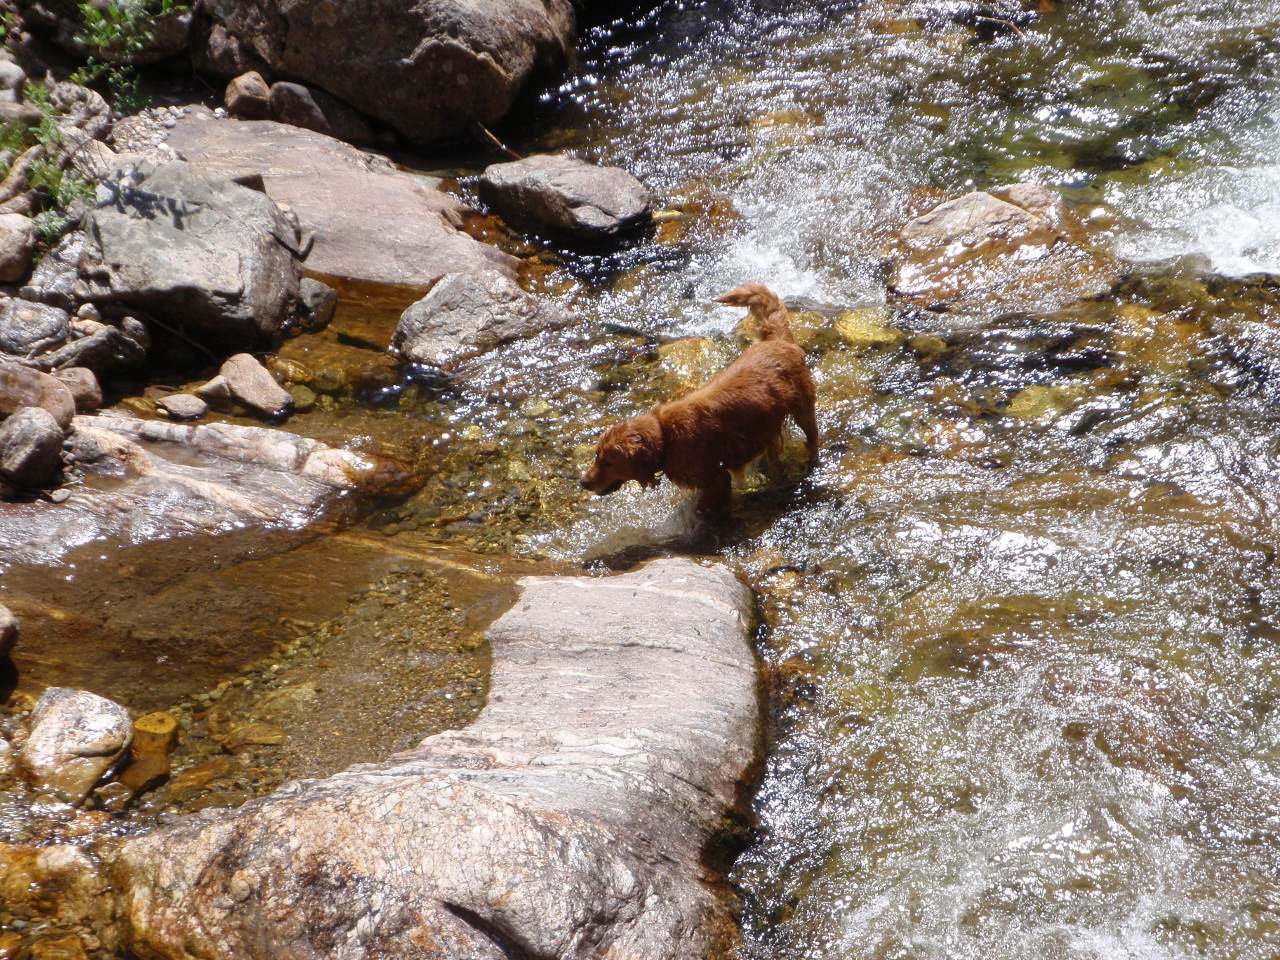 Cody cools off in the Little Wenatchee